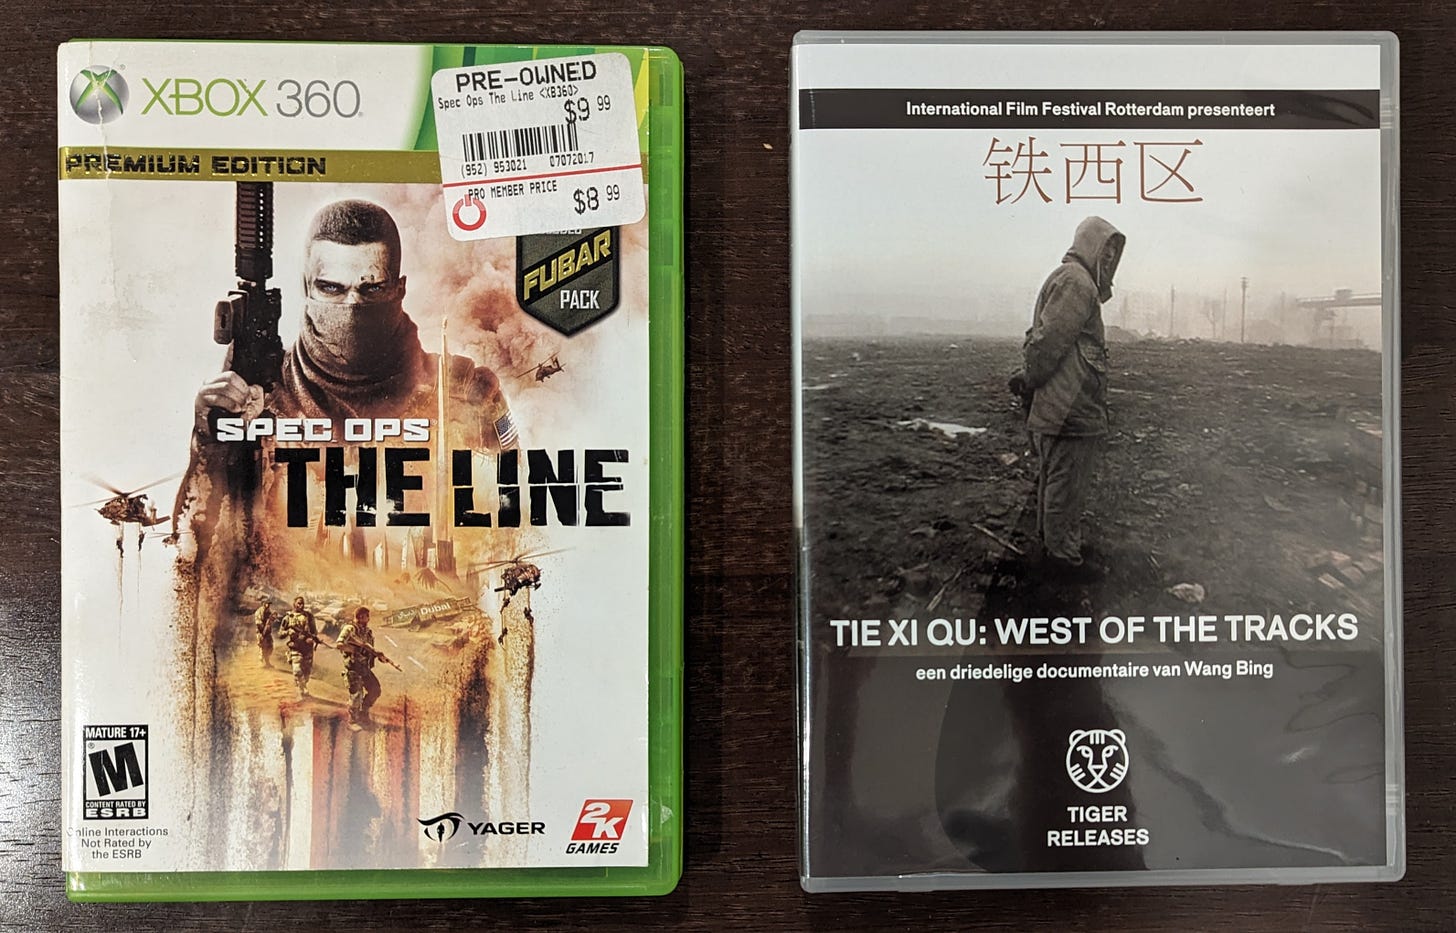 My copies of Spec Ops: The Line and Tie Xi Qu: West of the Tracks